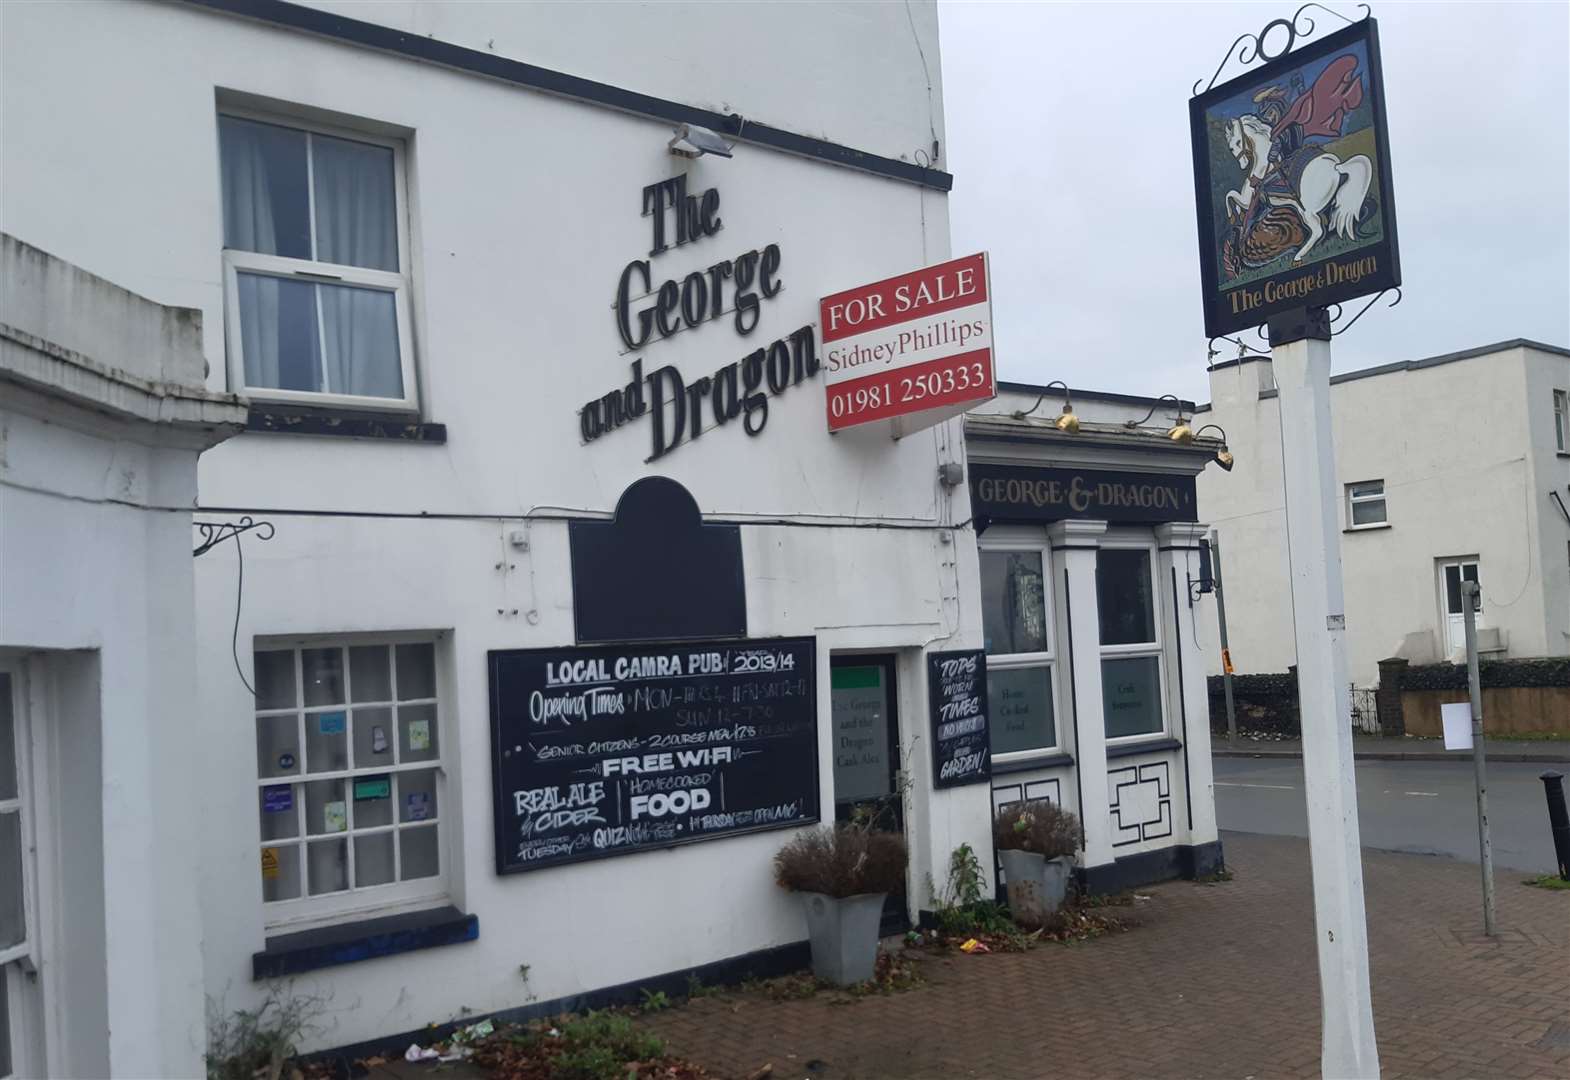 The George and Dragon Pub in Swanscombe has been on the market for many years without success